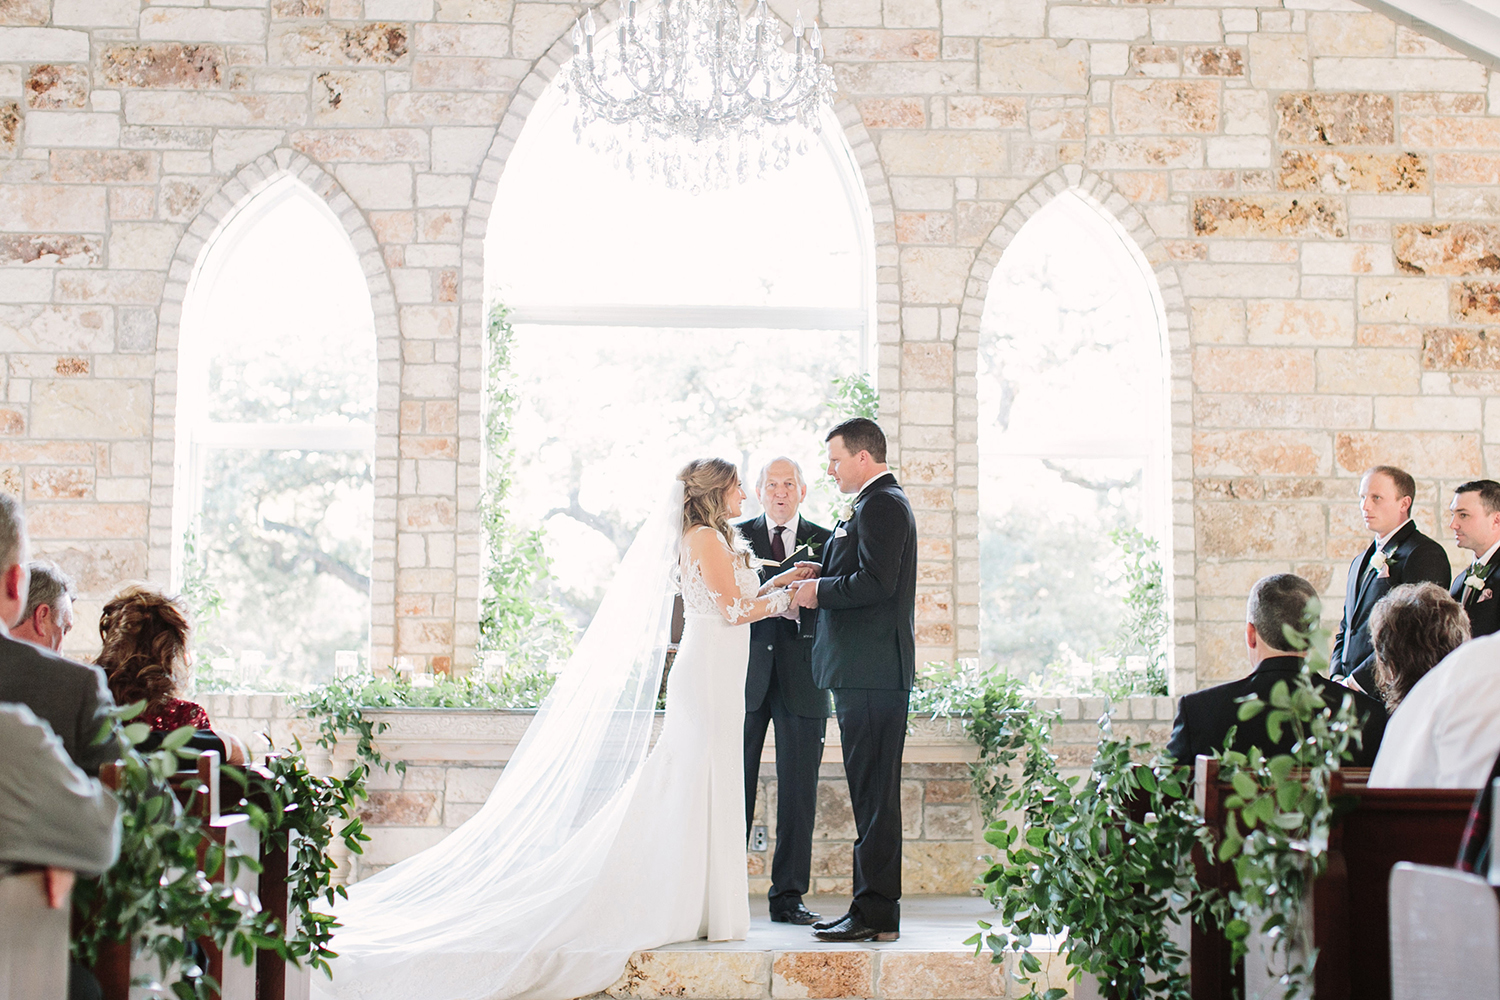 Elevating Your Wedding Day Decor with Your Florals | Reiley and Rose | Central Texas Floral Designer | Chandelier of Gruene | central texas wedding venue, wedding inspiration, floral inspiration, wedding decor, ceremony space decor, greenery wedding decor | via reileyandrose.com